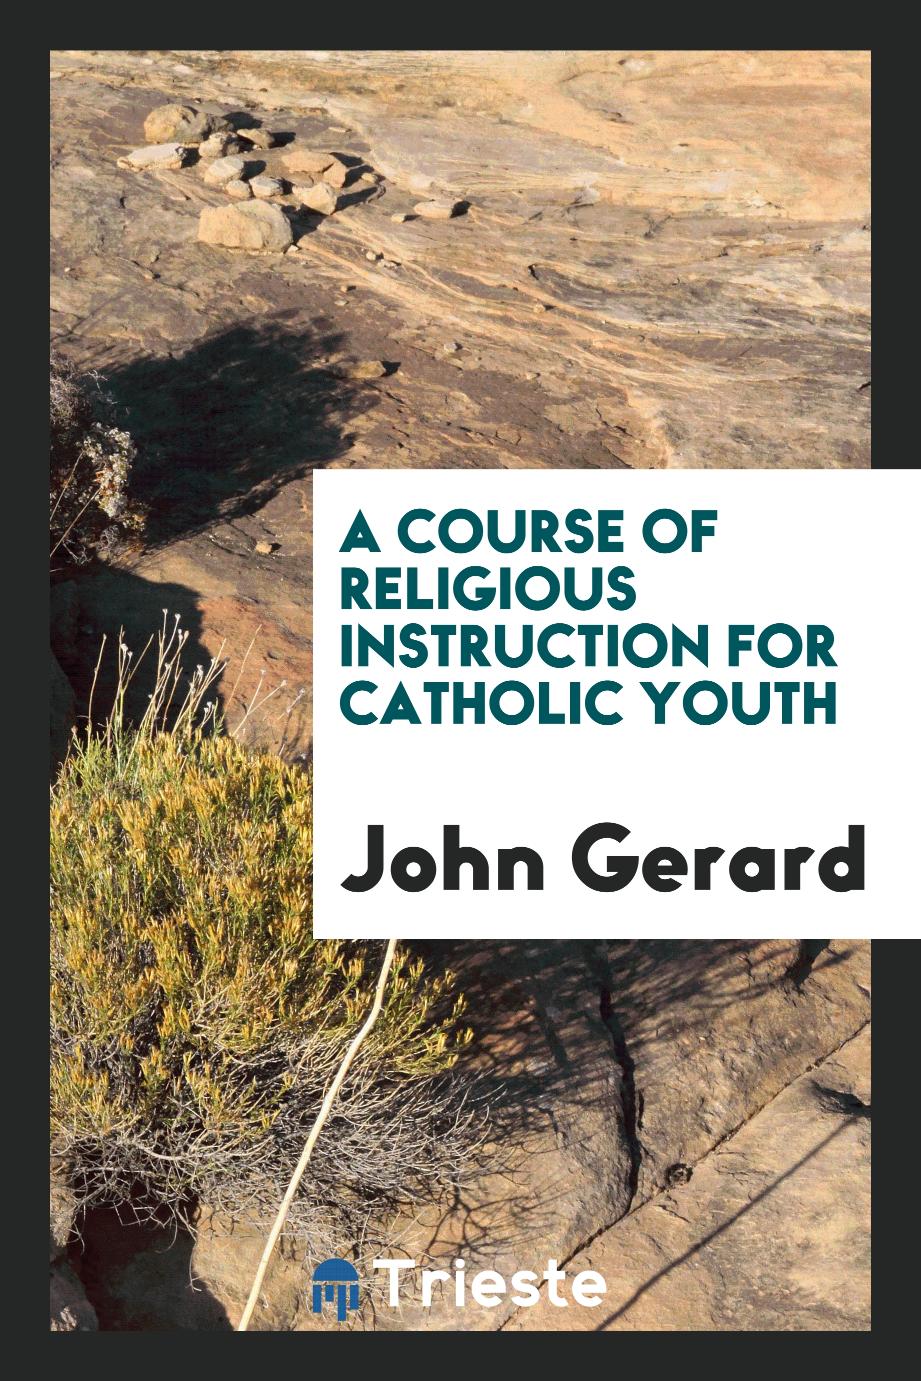 A course of religious instruction for Catholic youth